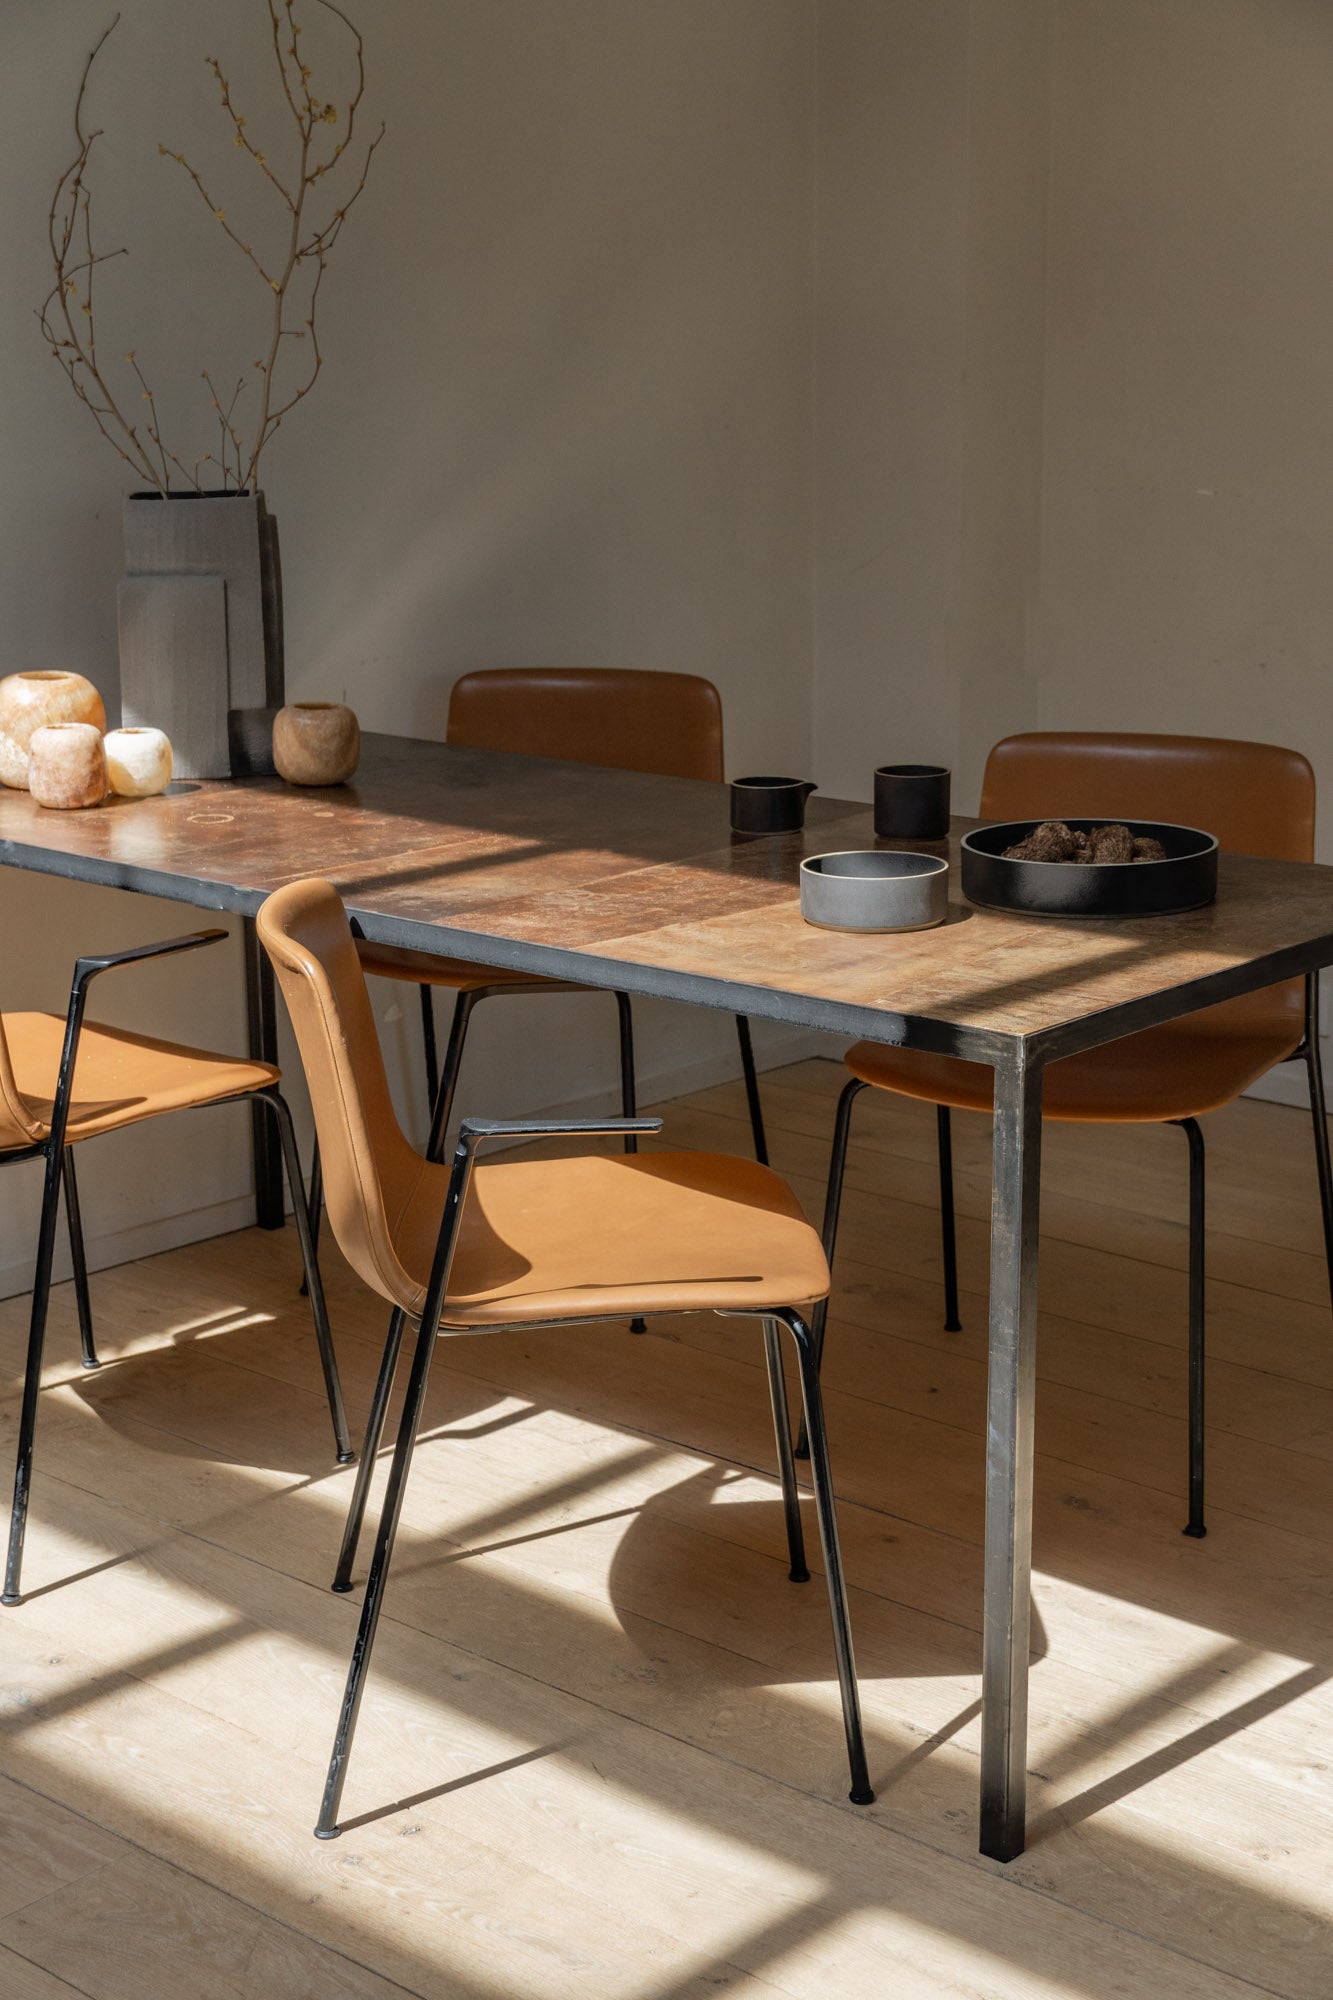 CTR Leather Table by Heerenhuis in interior setting.